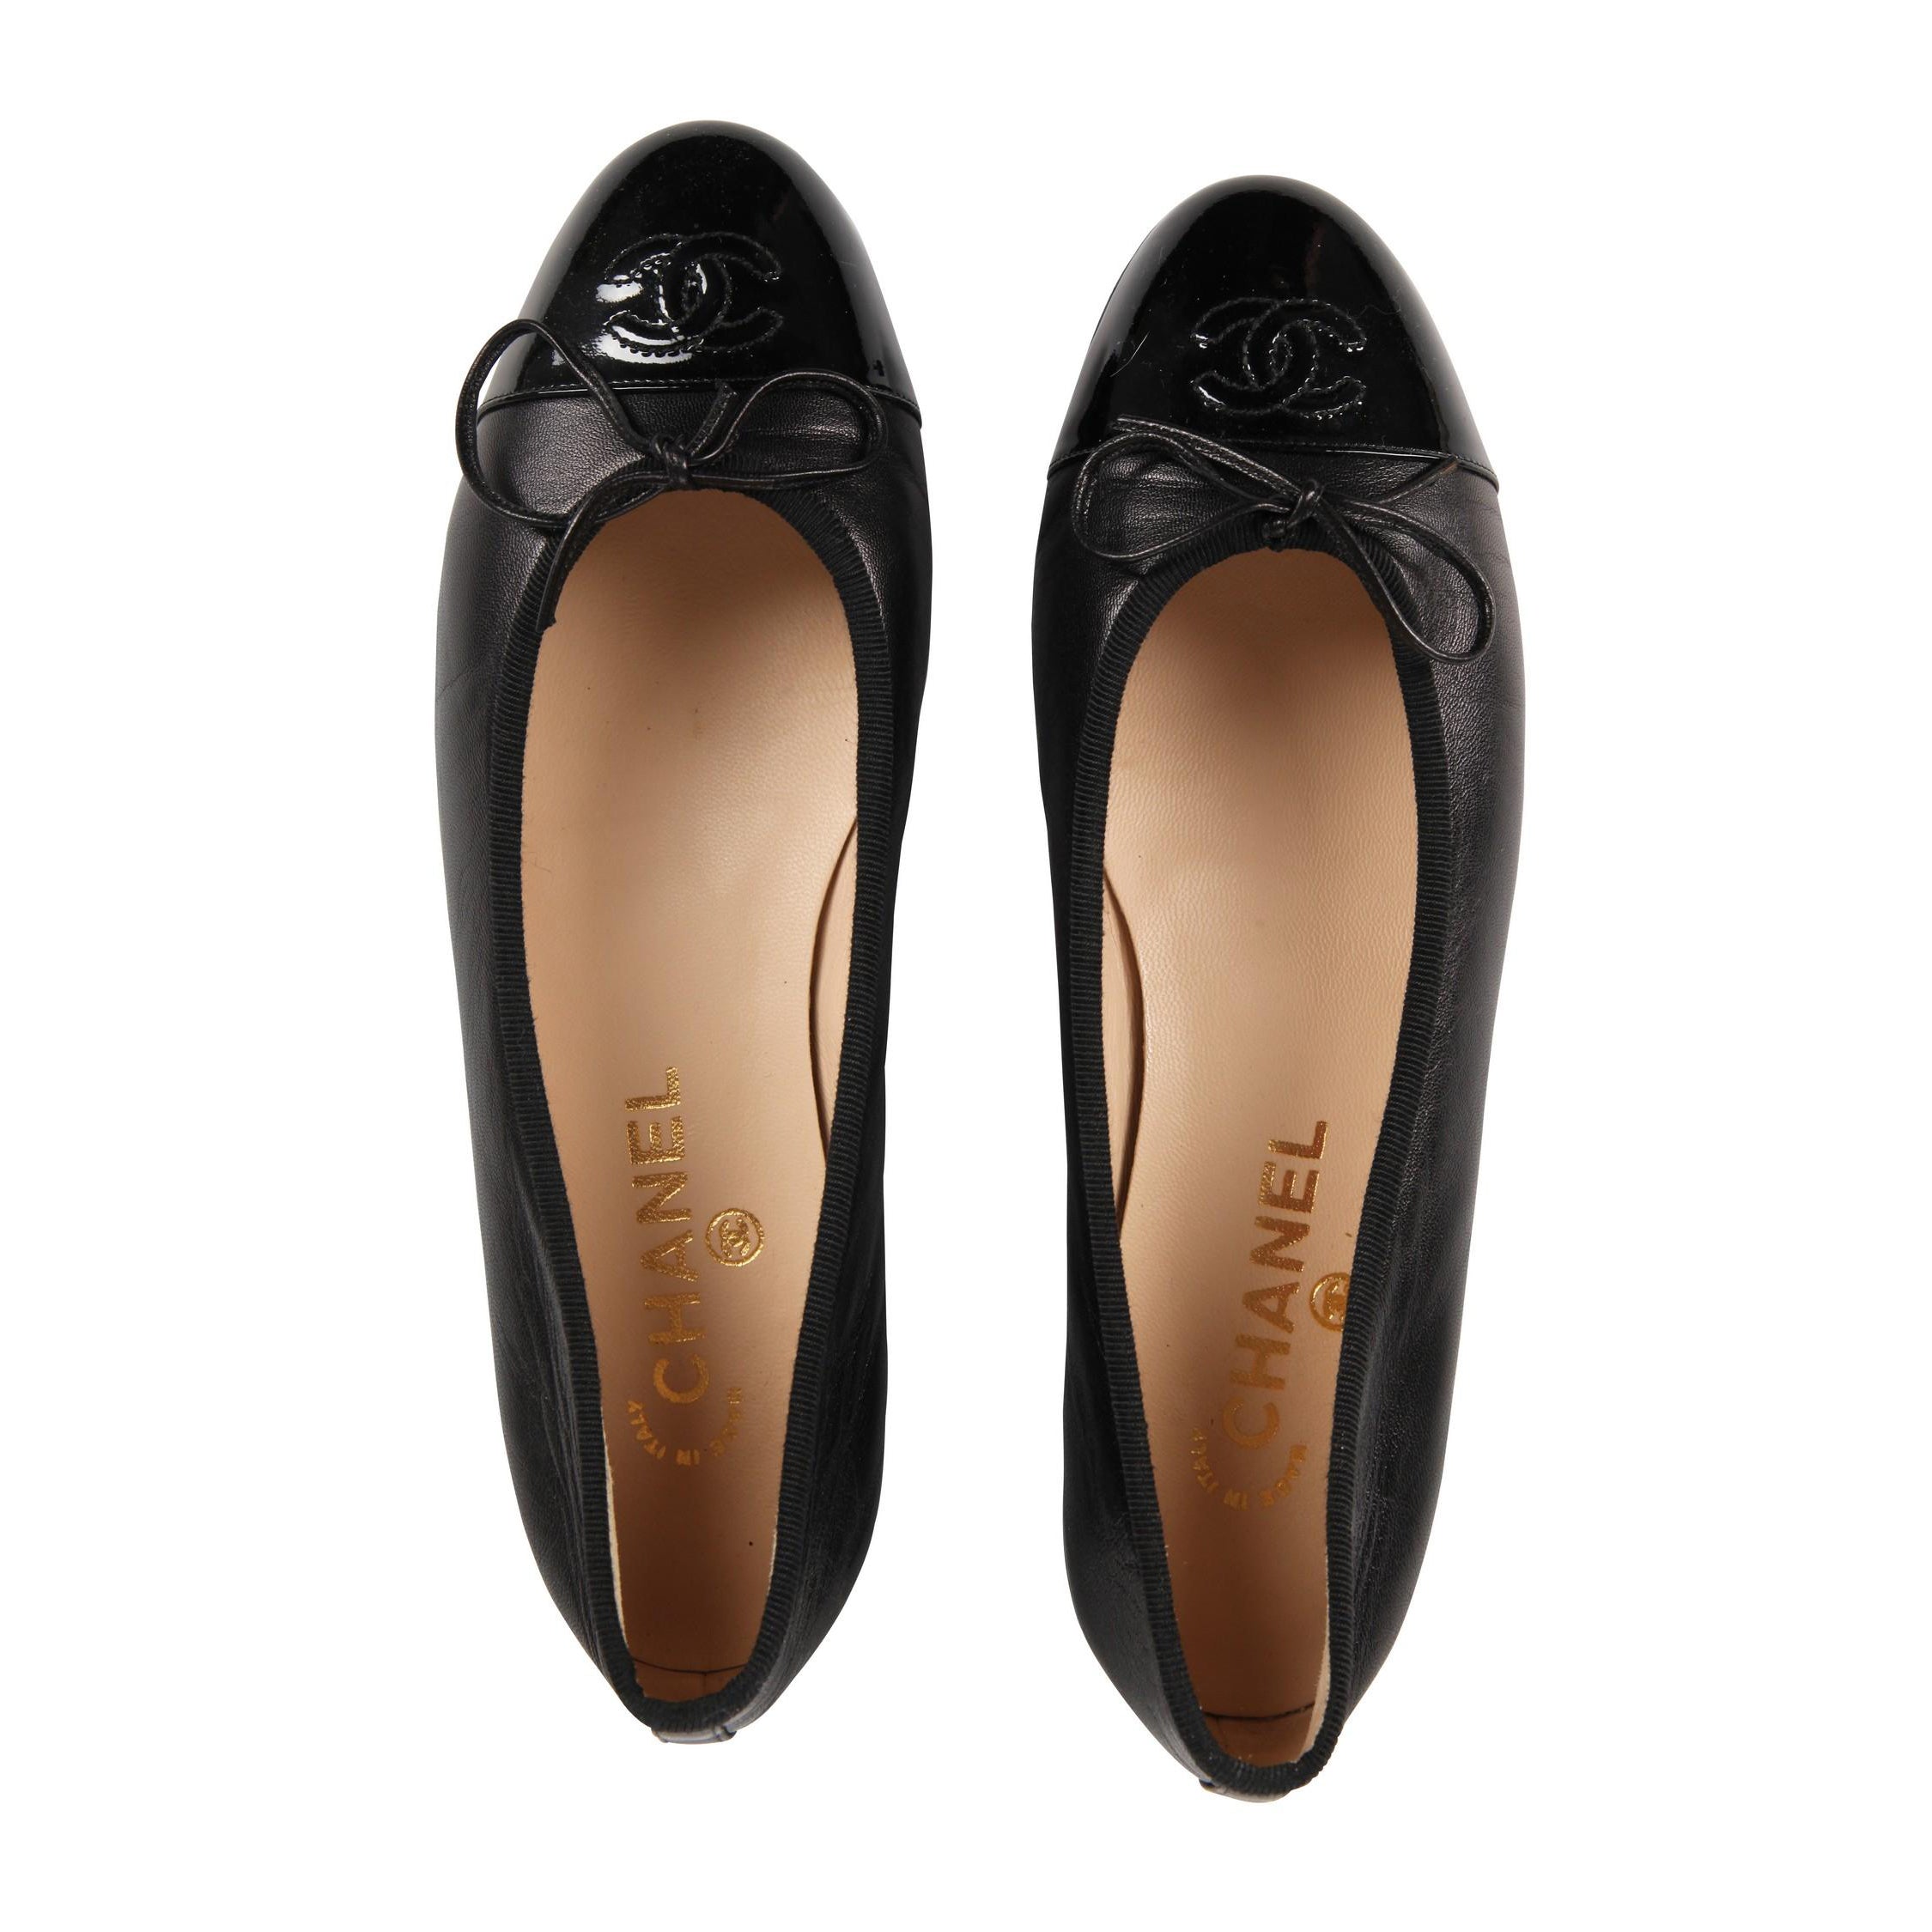 Leather ballet flats Chanel Black size 39.5 EU in Leather - 34261489